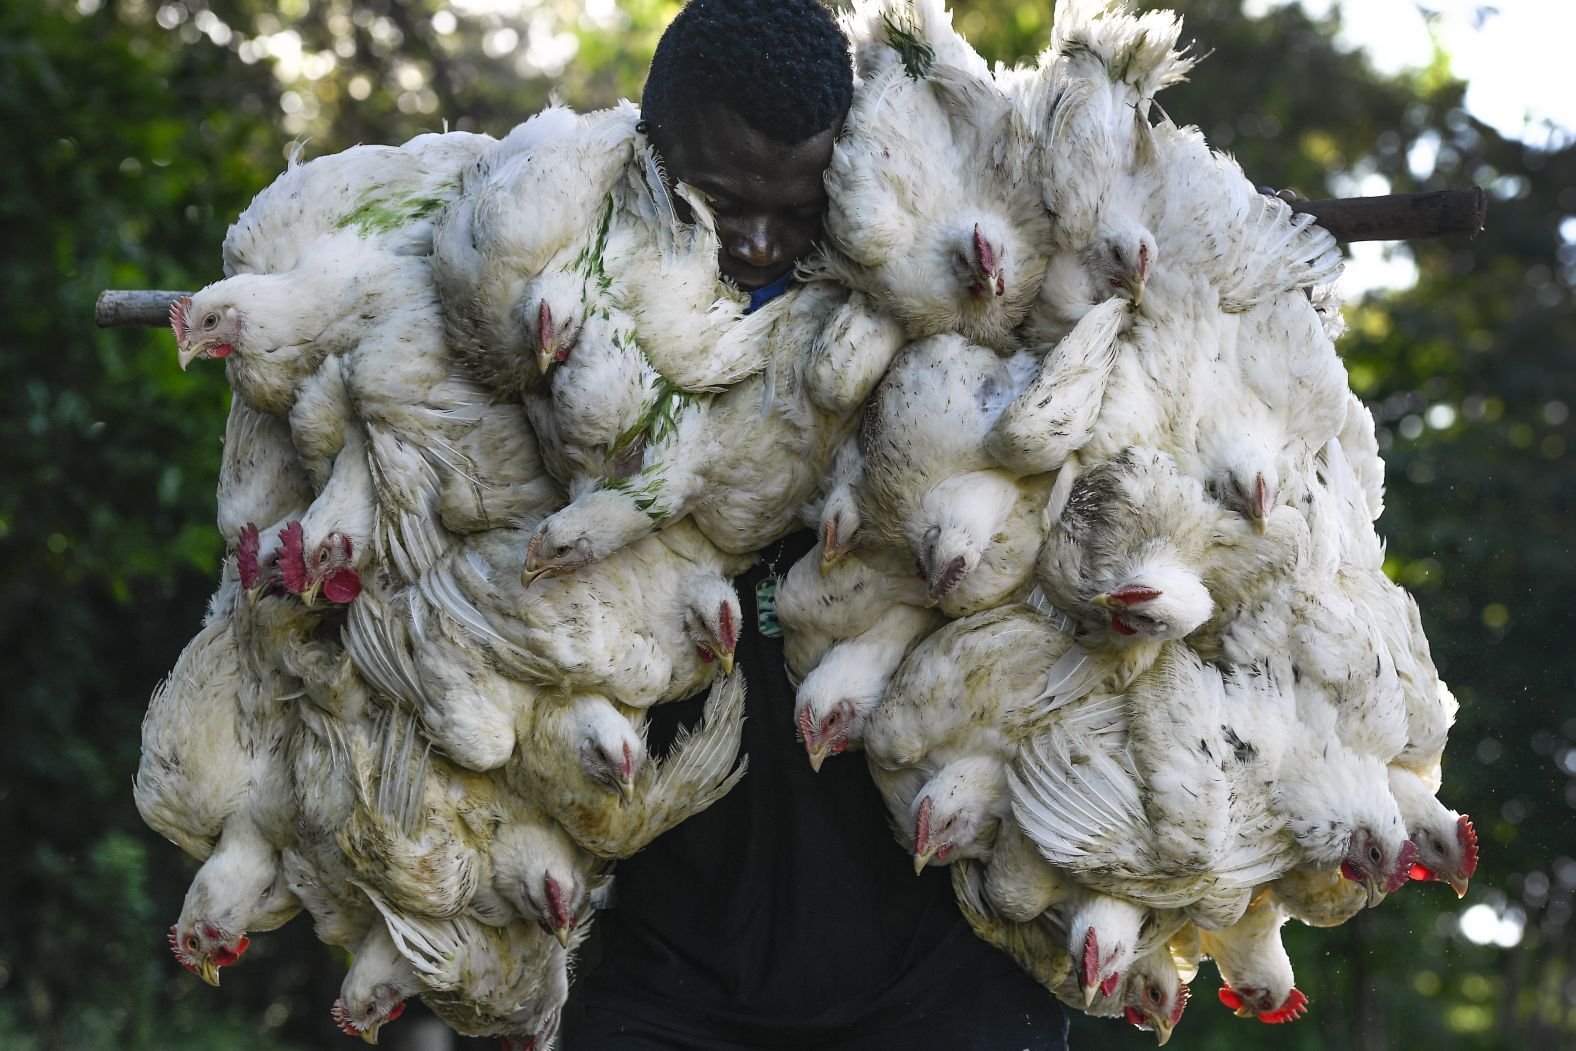 A man returns to Haiti after buying chickens at a market in Dajabón, Dominican Republic, on Friday, November 19.